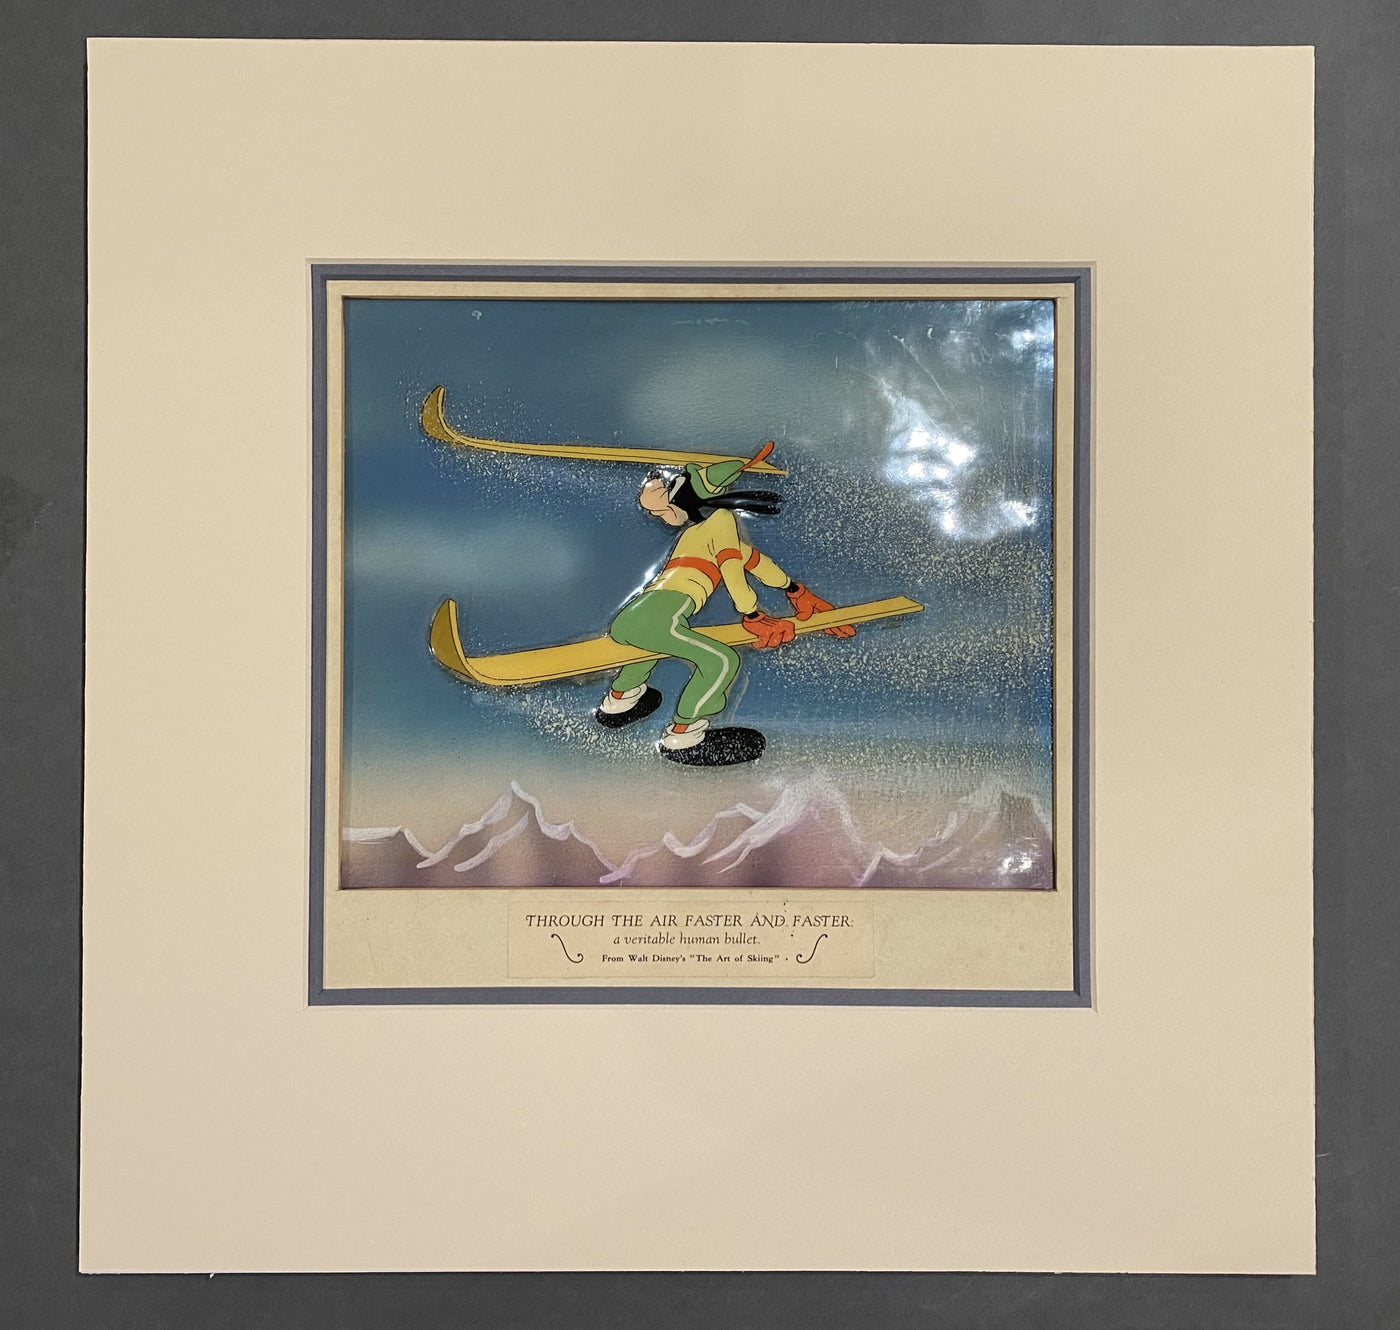 Original Walt Disney Production Cel on Courvoisier background from The Art of Skiing